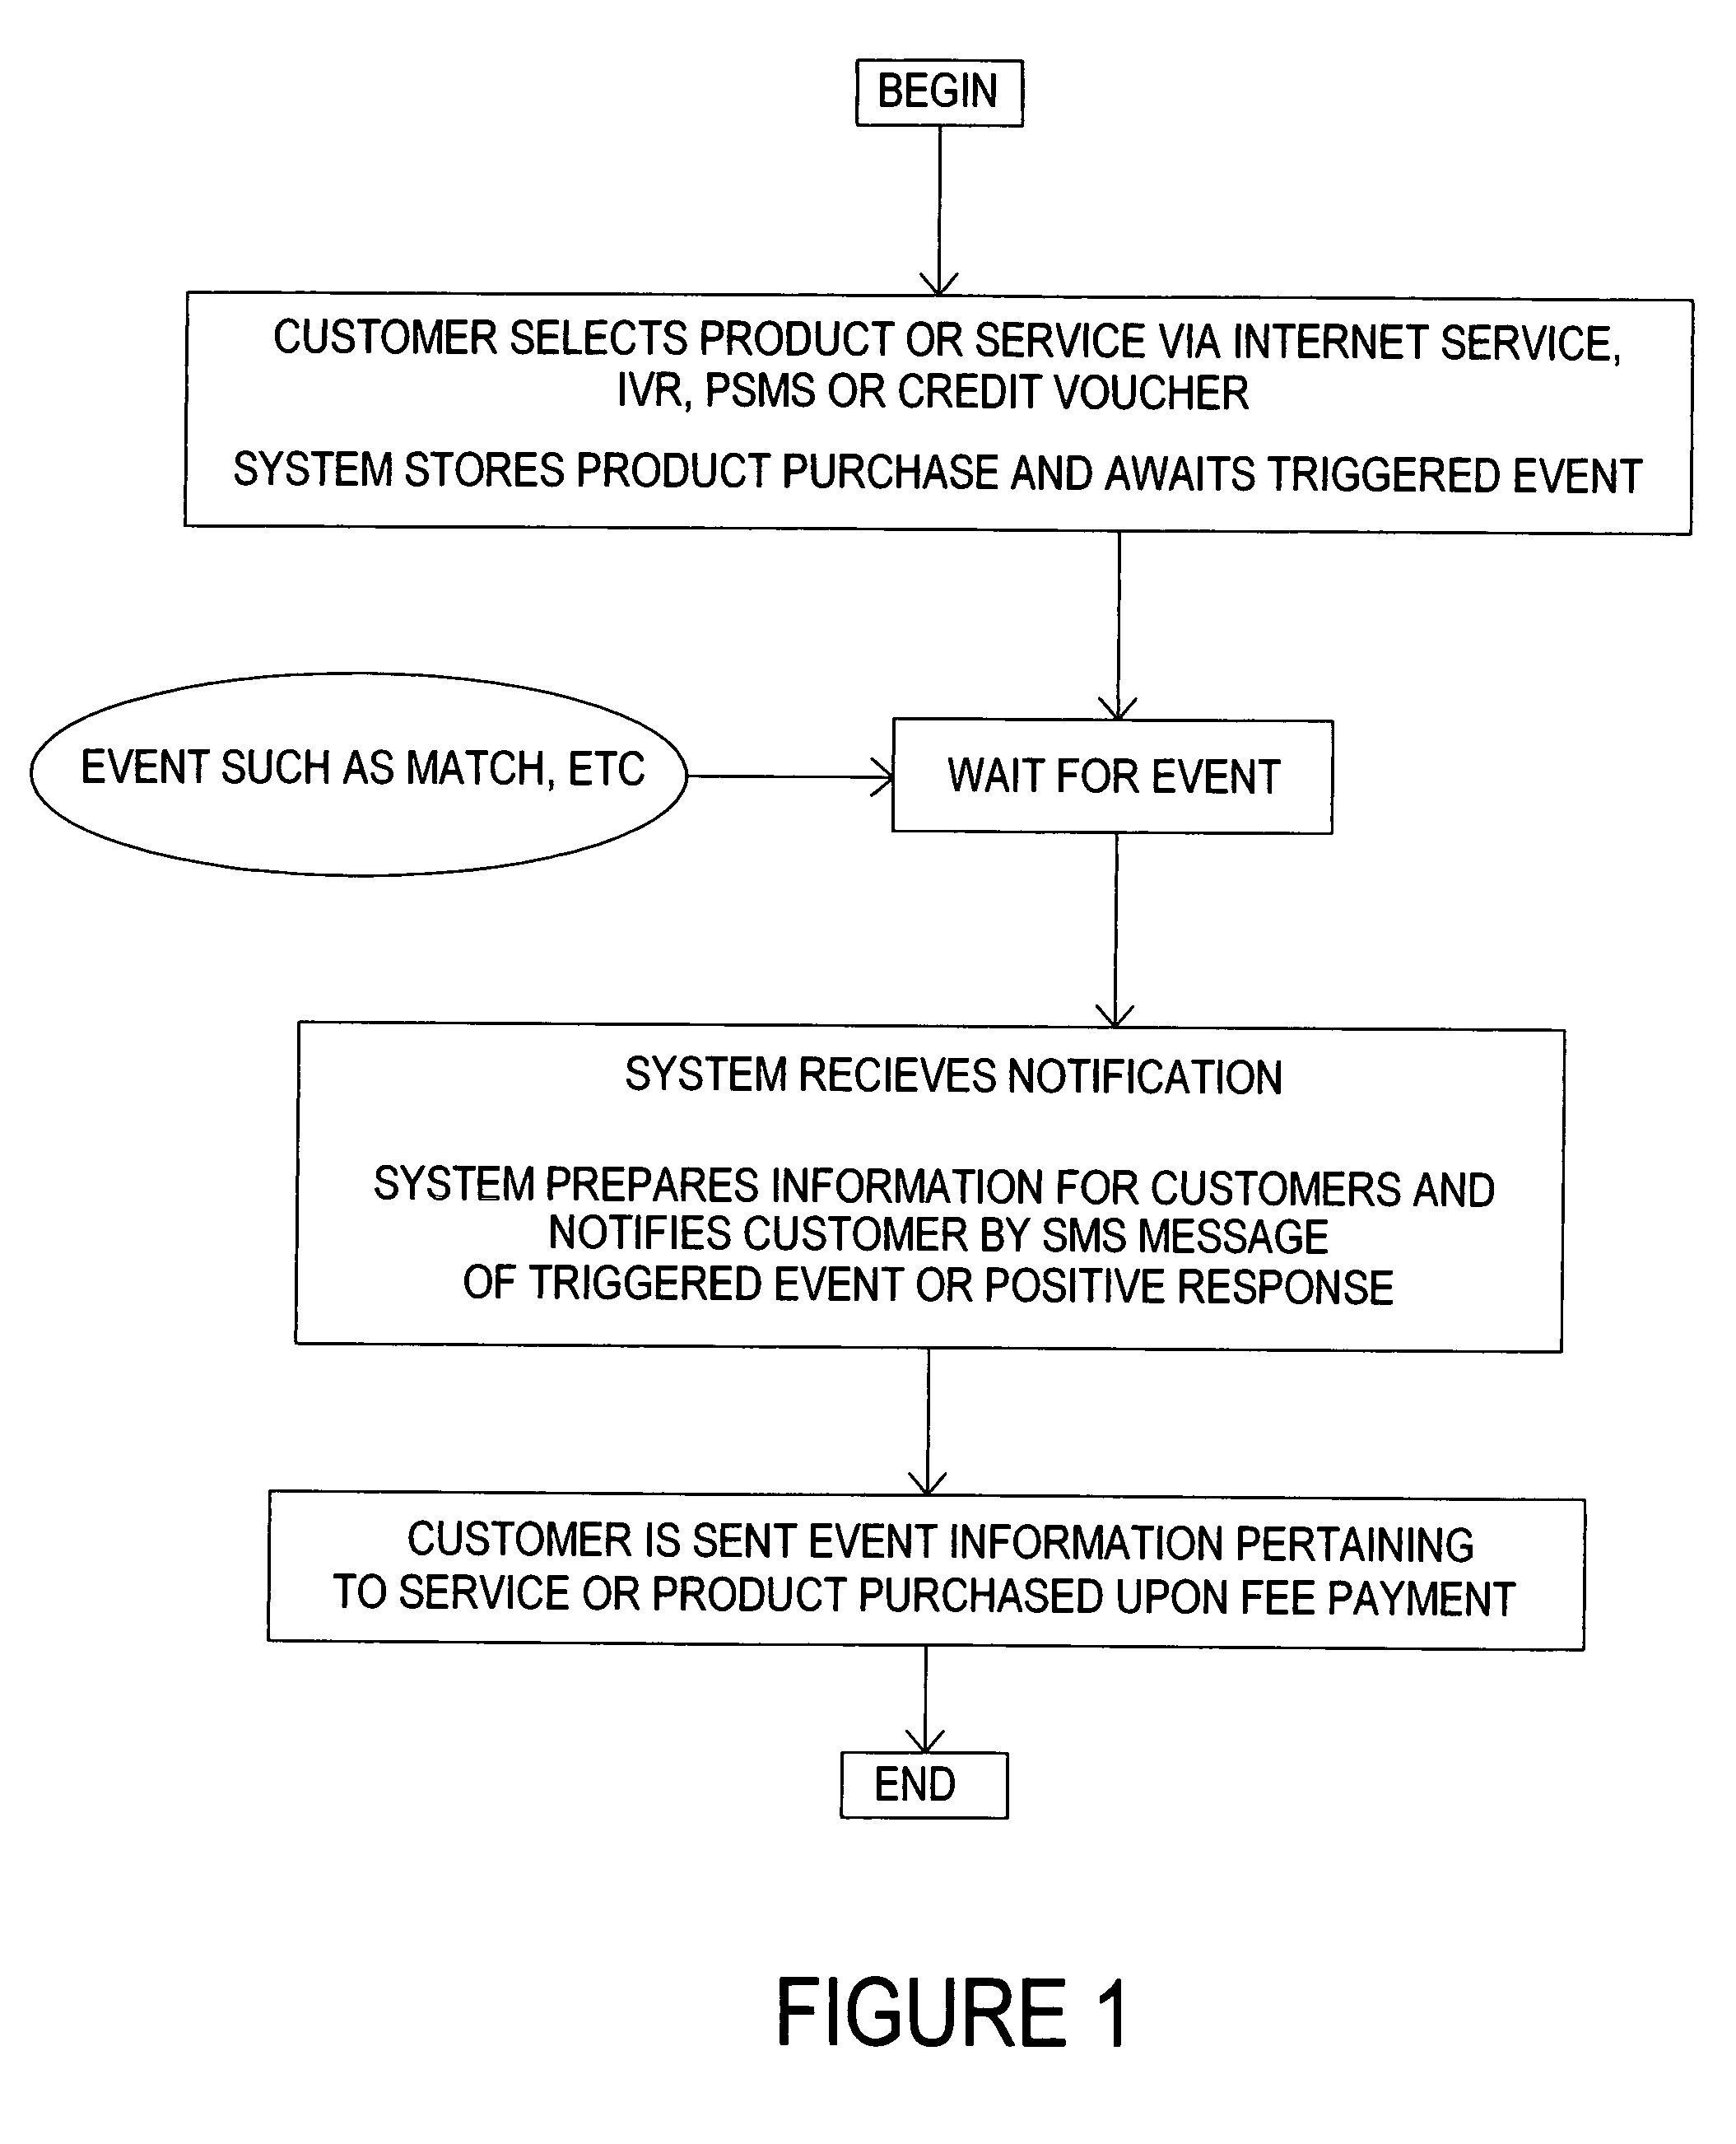 SMS messaging-based layered service and contact method, system and method of conducting business